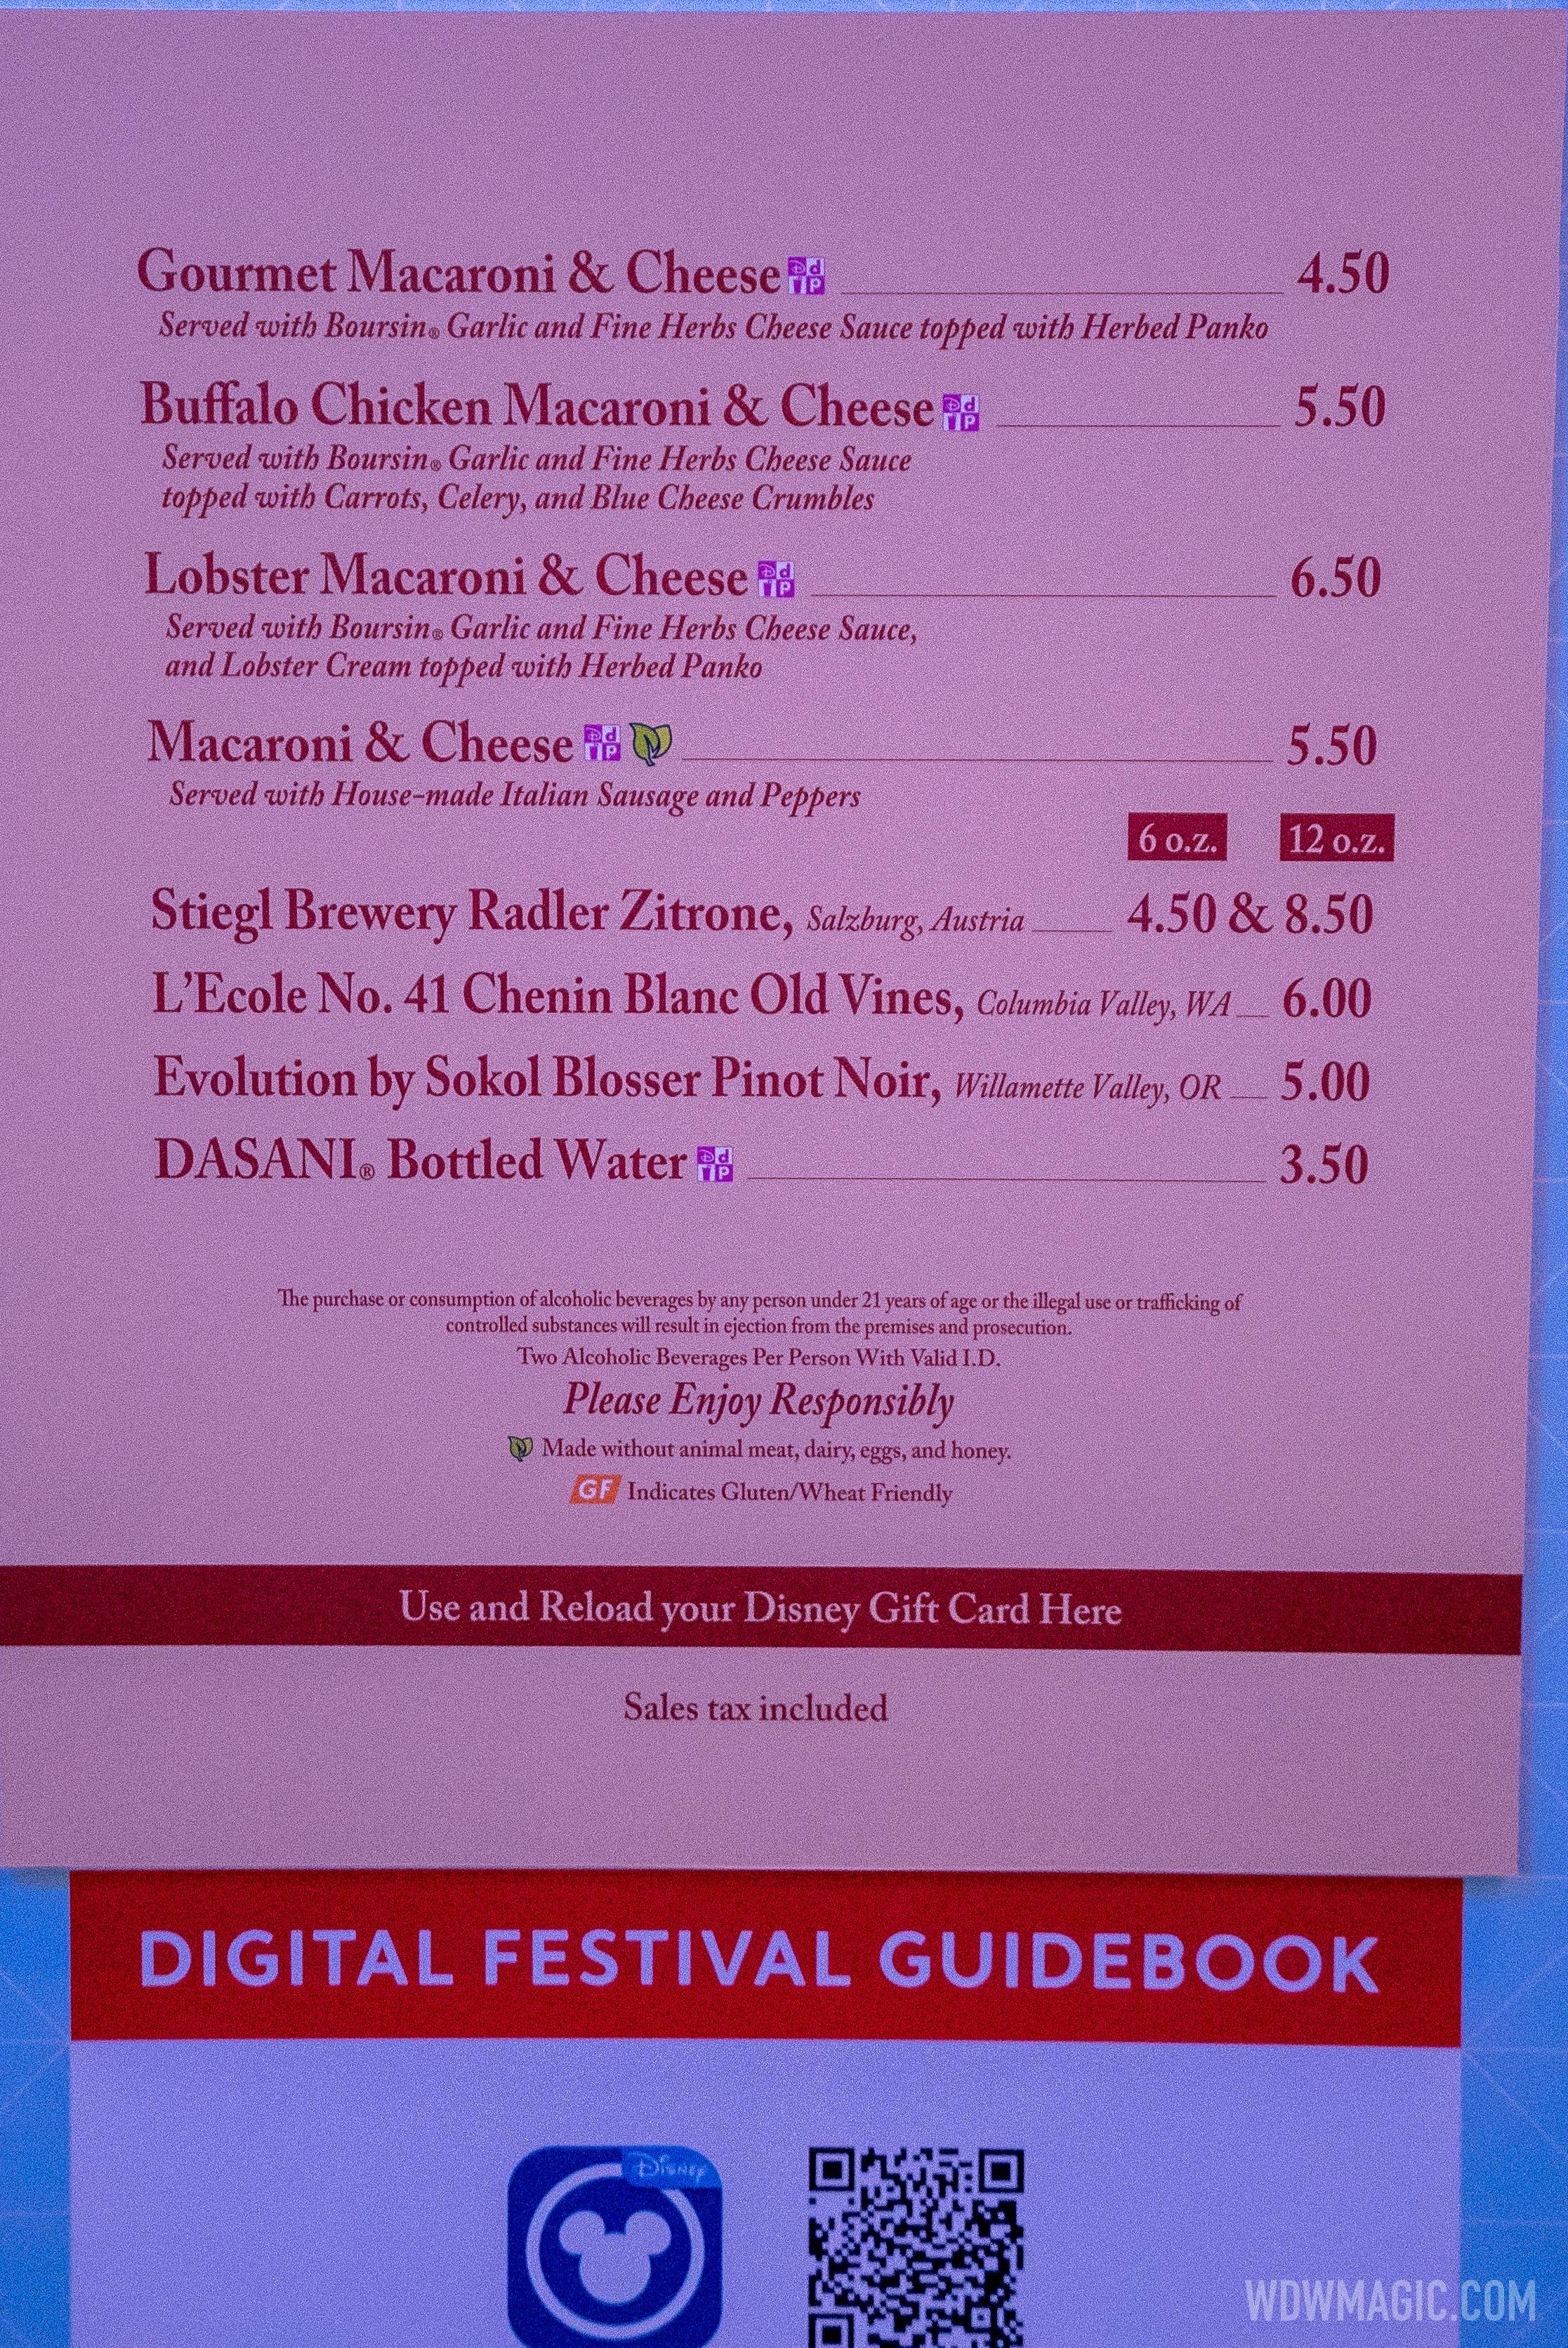 Taste of EPCOT Food and Wine Festival - Mac and Cheese menu